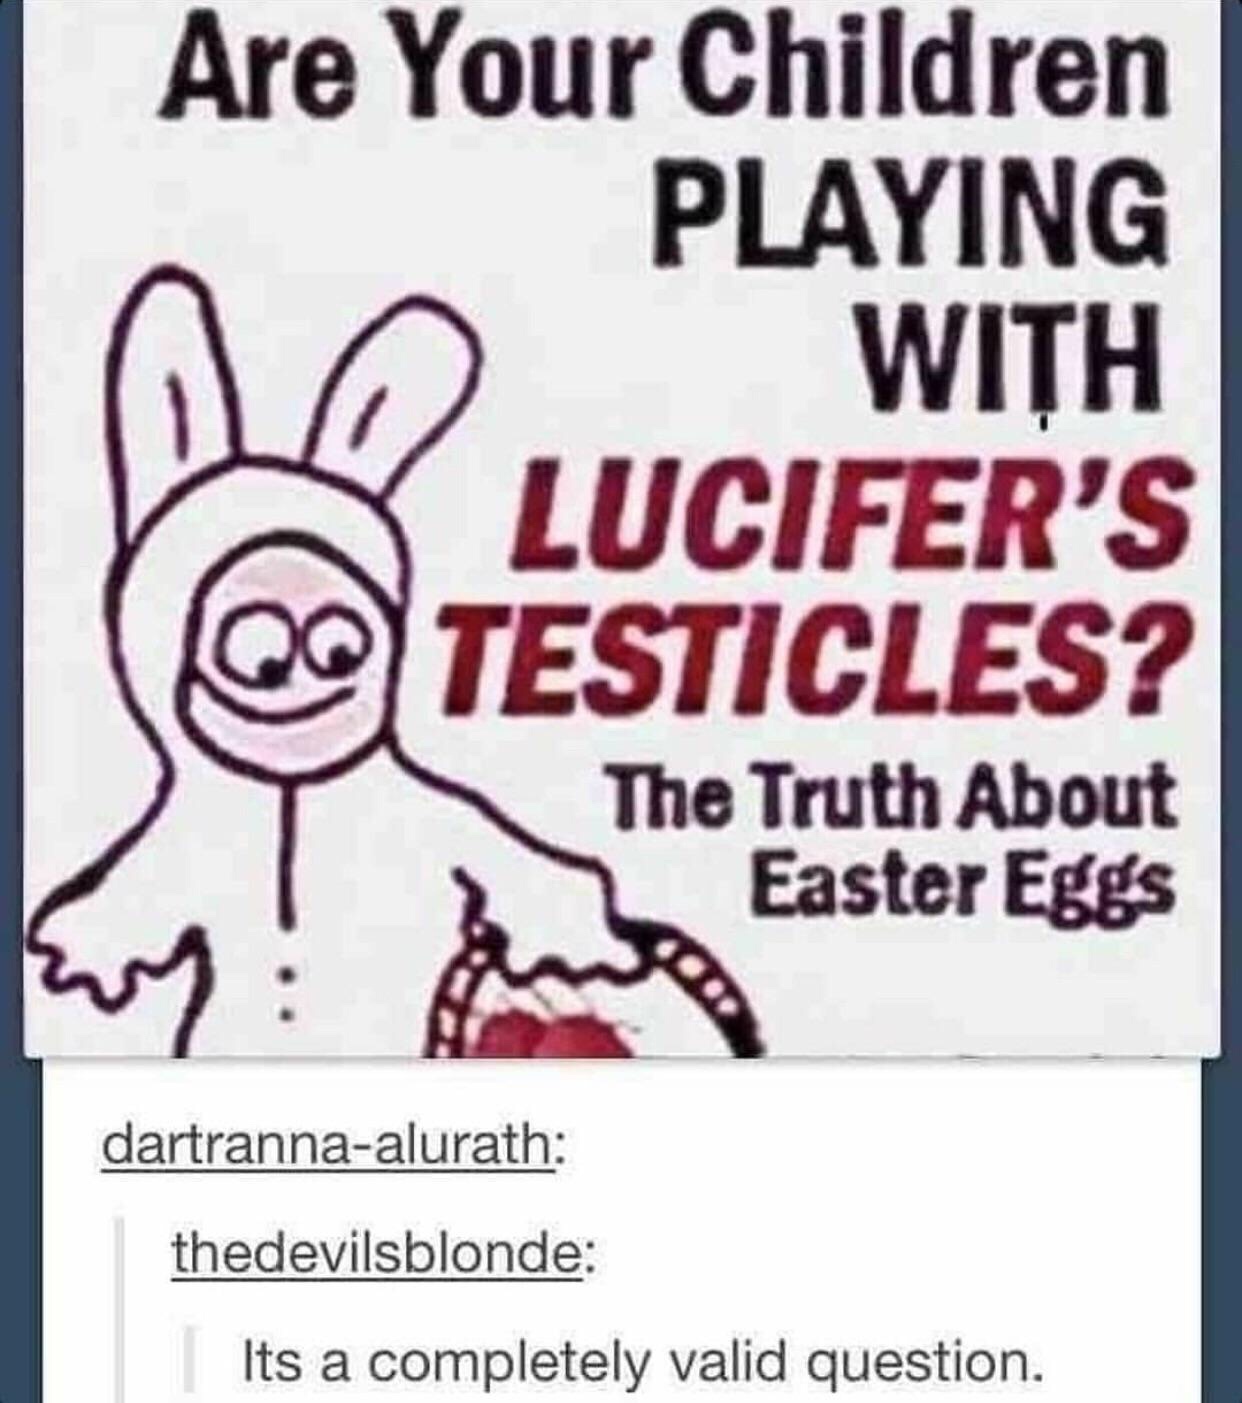 lucifer's testicles - Are Your Children Playing With Lucifer'S Q Testicles? The Truth About Easter Eggs dartrannaalurath thedevilsblonde Its a completely valid question.